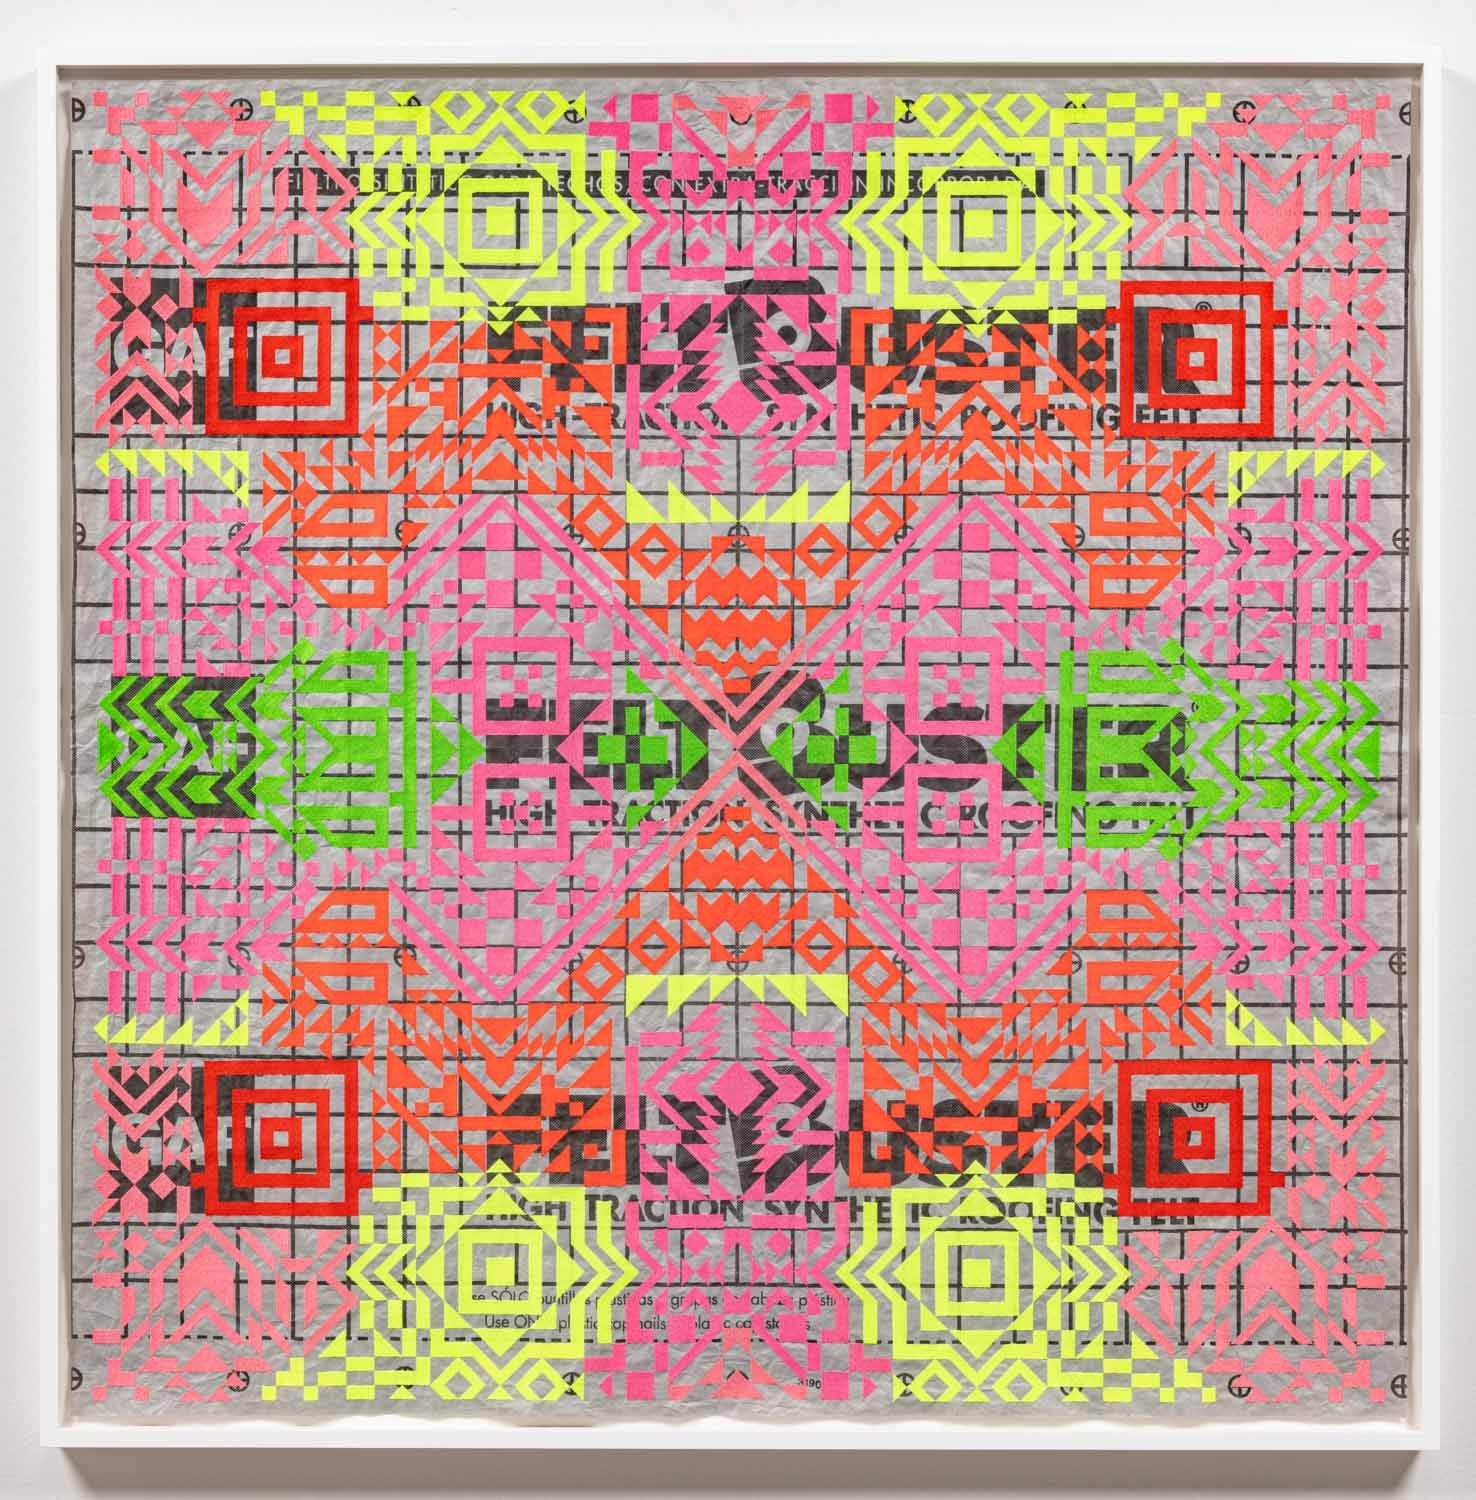   Caroline Monnet,   Blanket 06 , 2022 ,Broderie sur feutre-toiture synthétique / Embroidery on synthetic roofing felt, 48 x 48 in. 